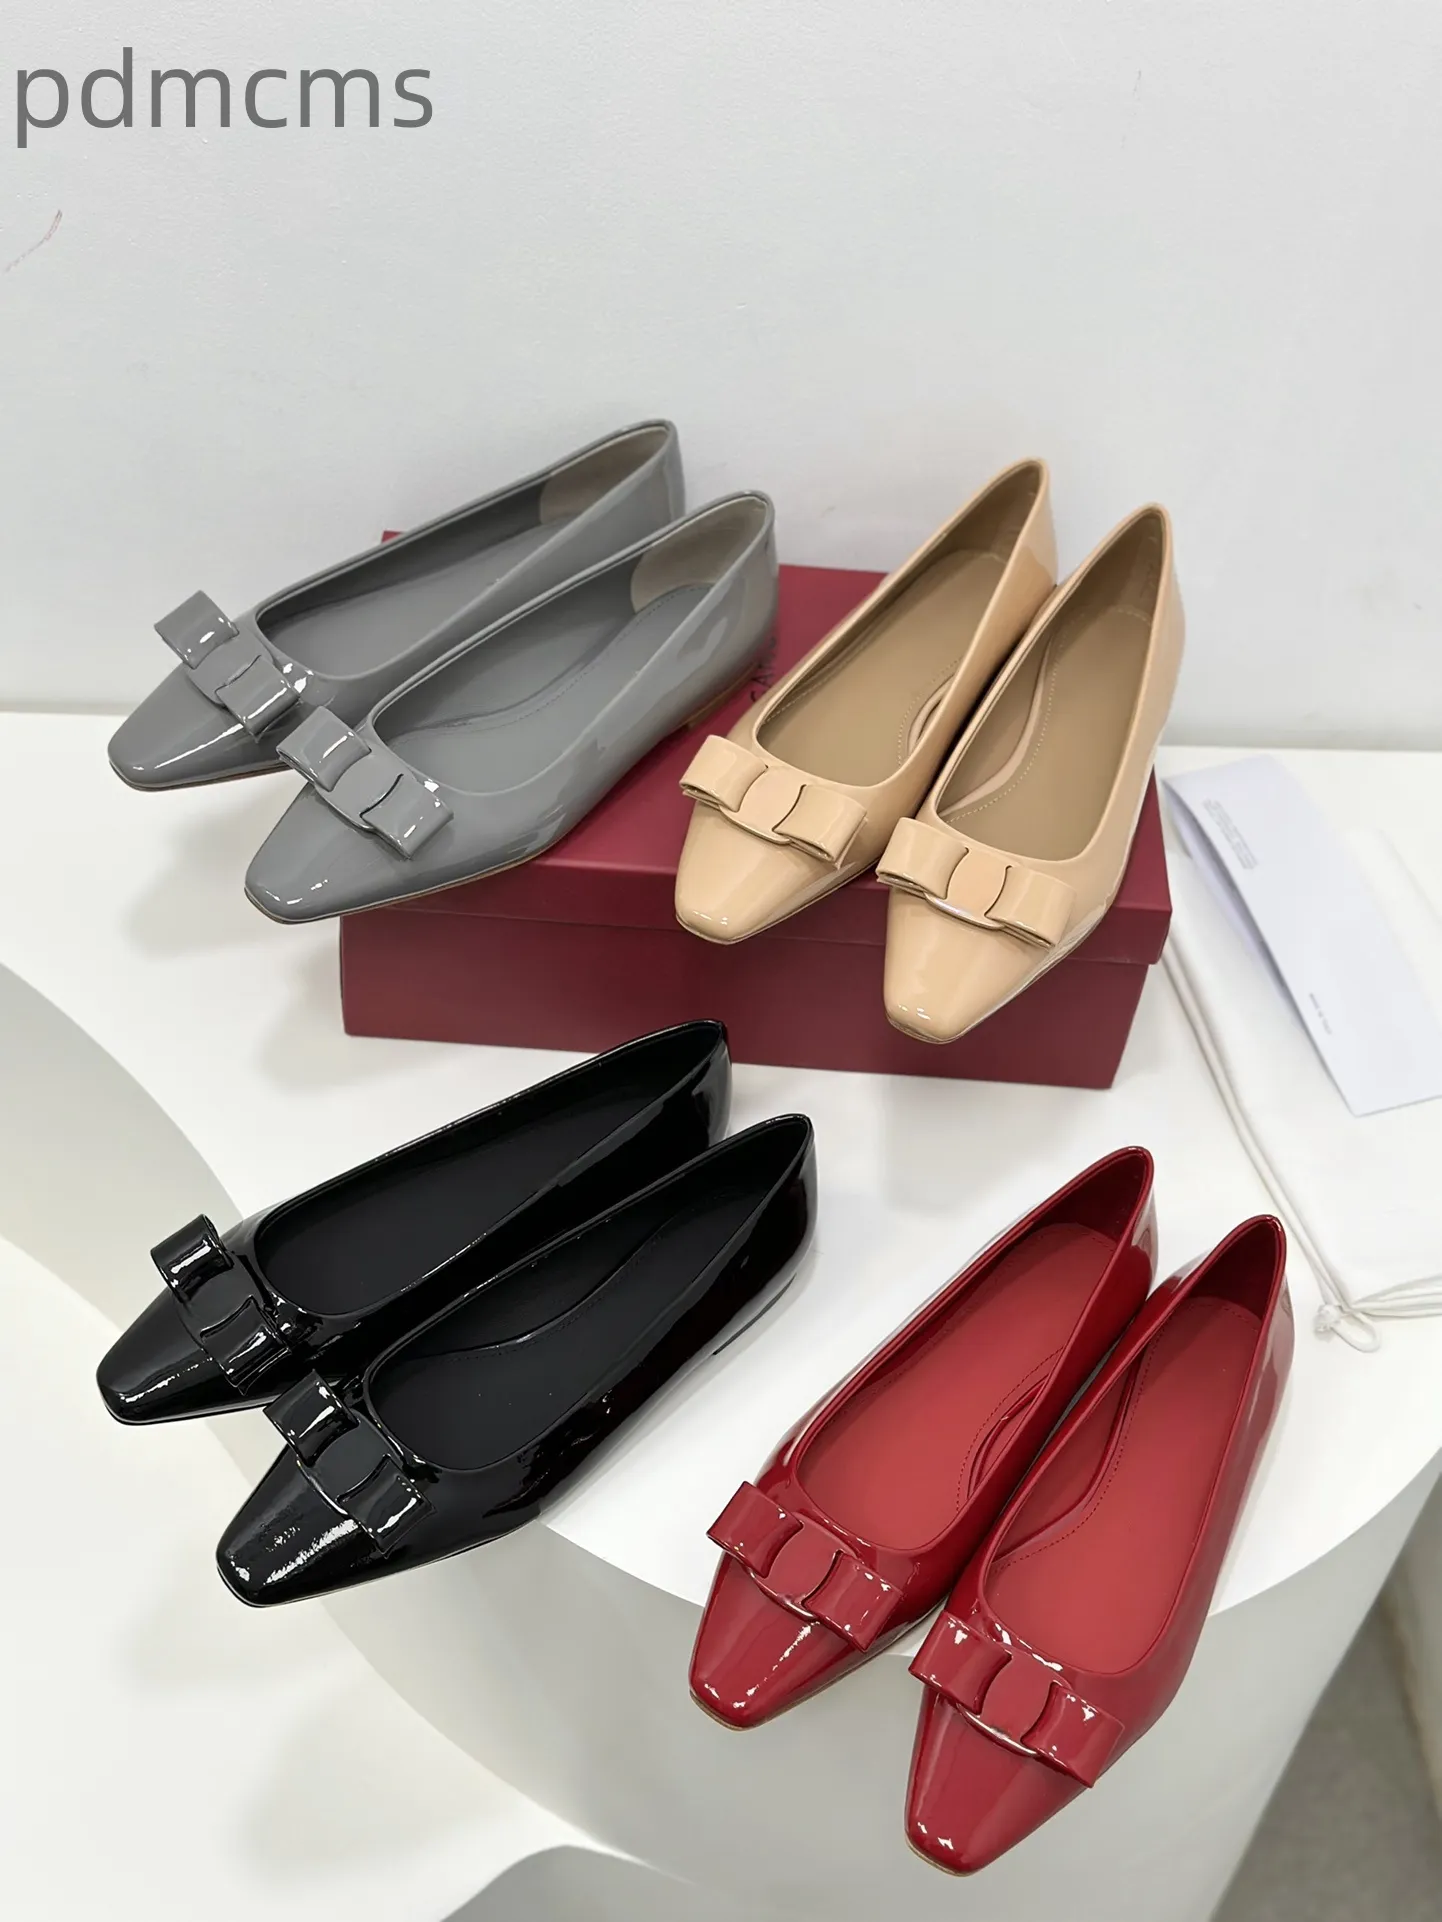 Spring and autumn patent leather flat ballet shoes are fashionable and comfortable, with a variety of colorful sizes. Sizes 34-40